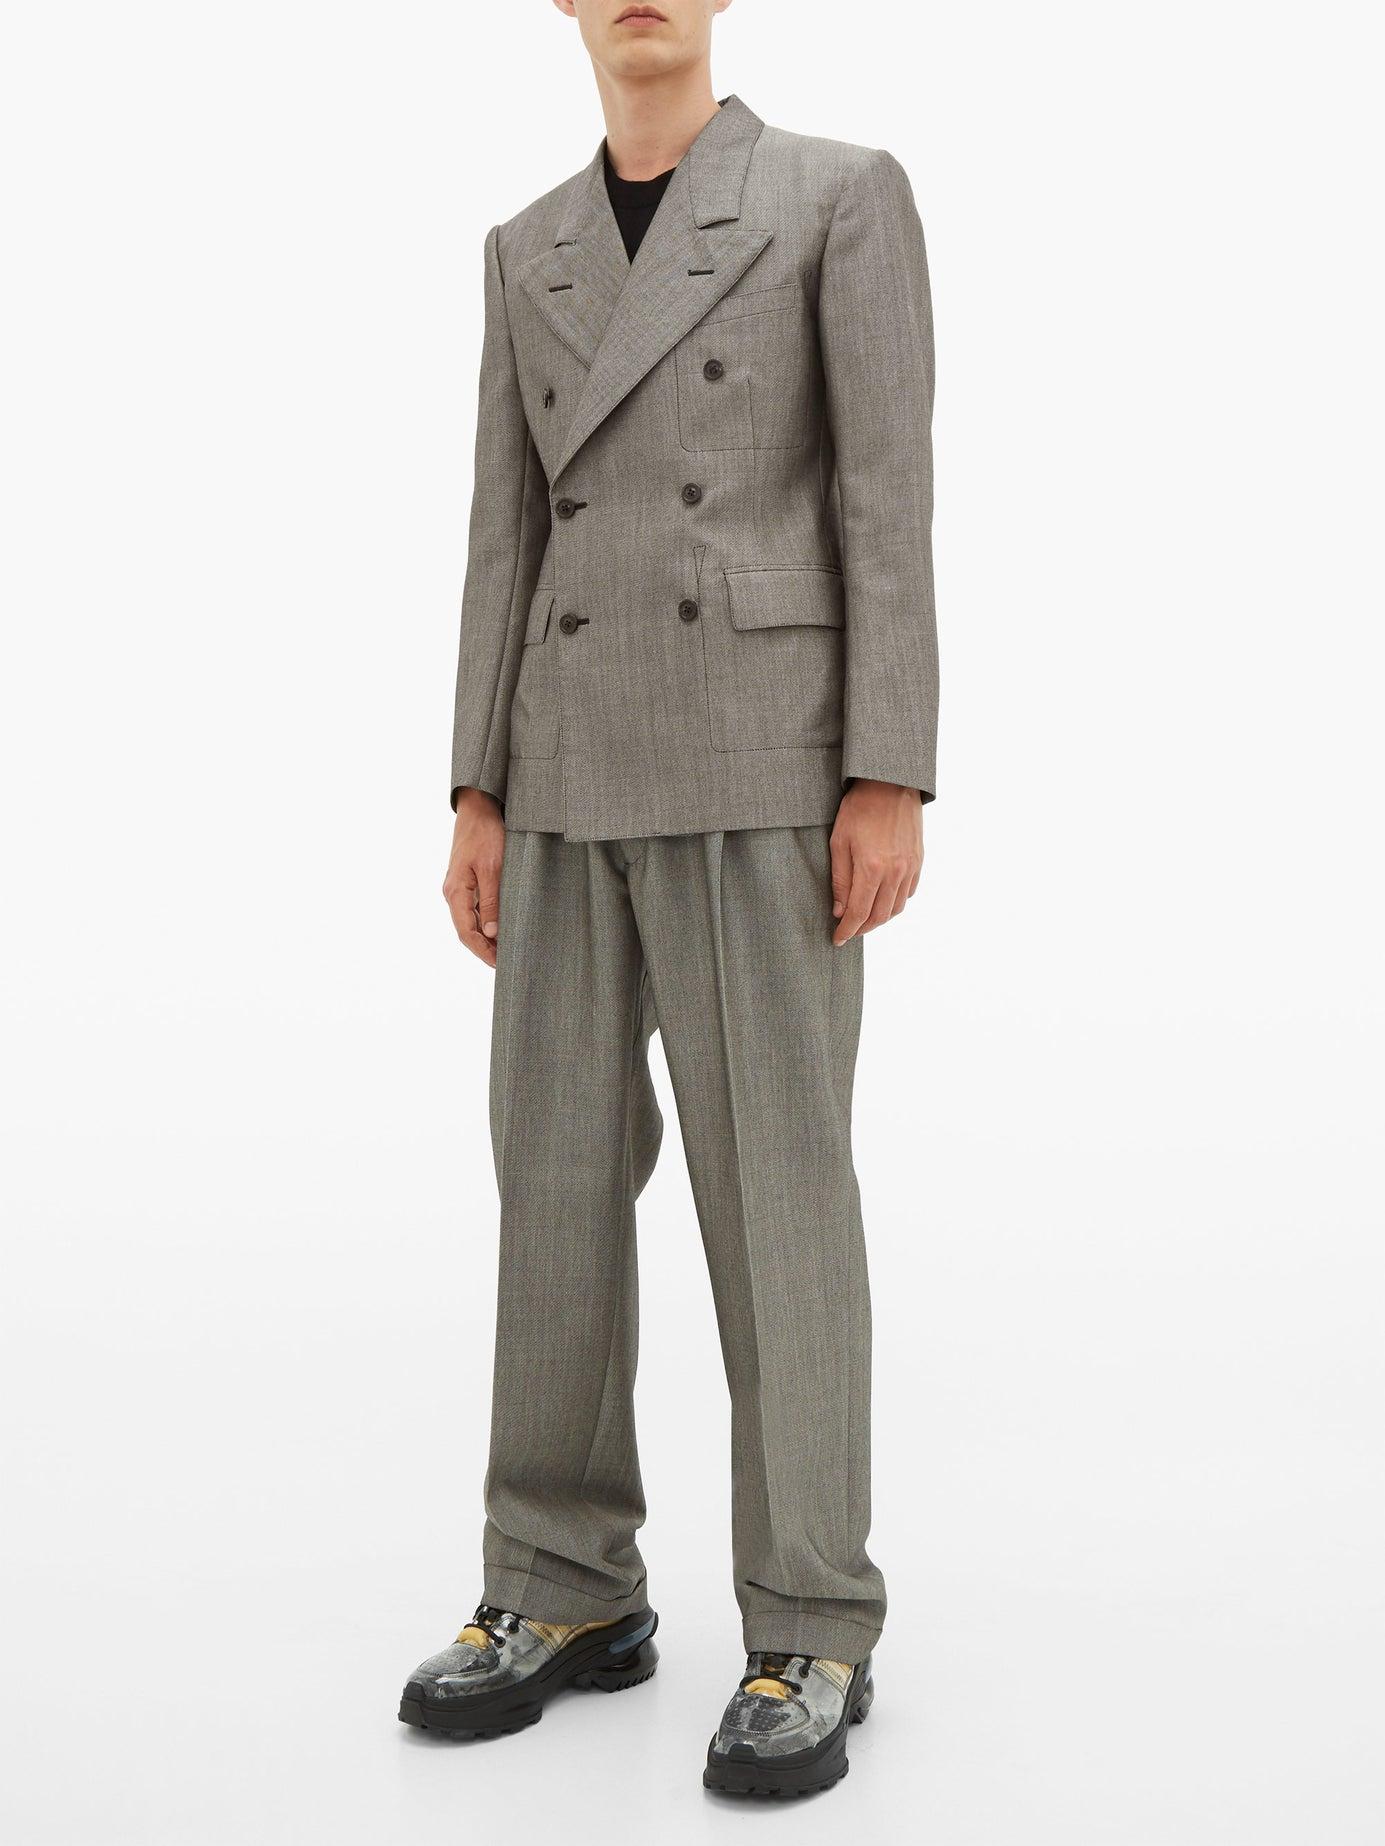 Maison Margiela Double Breasted Wool Suit in Gray for Men - Lyst